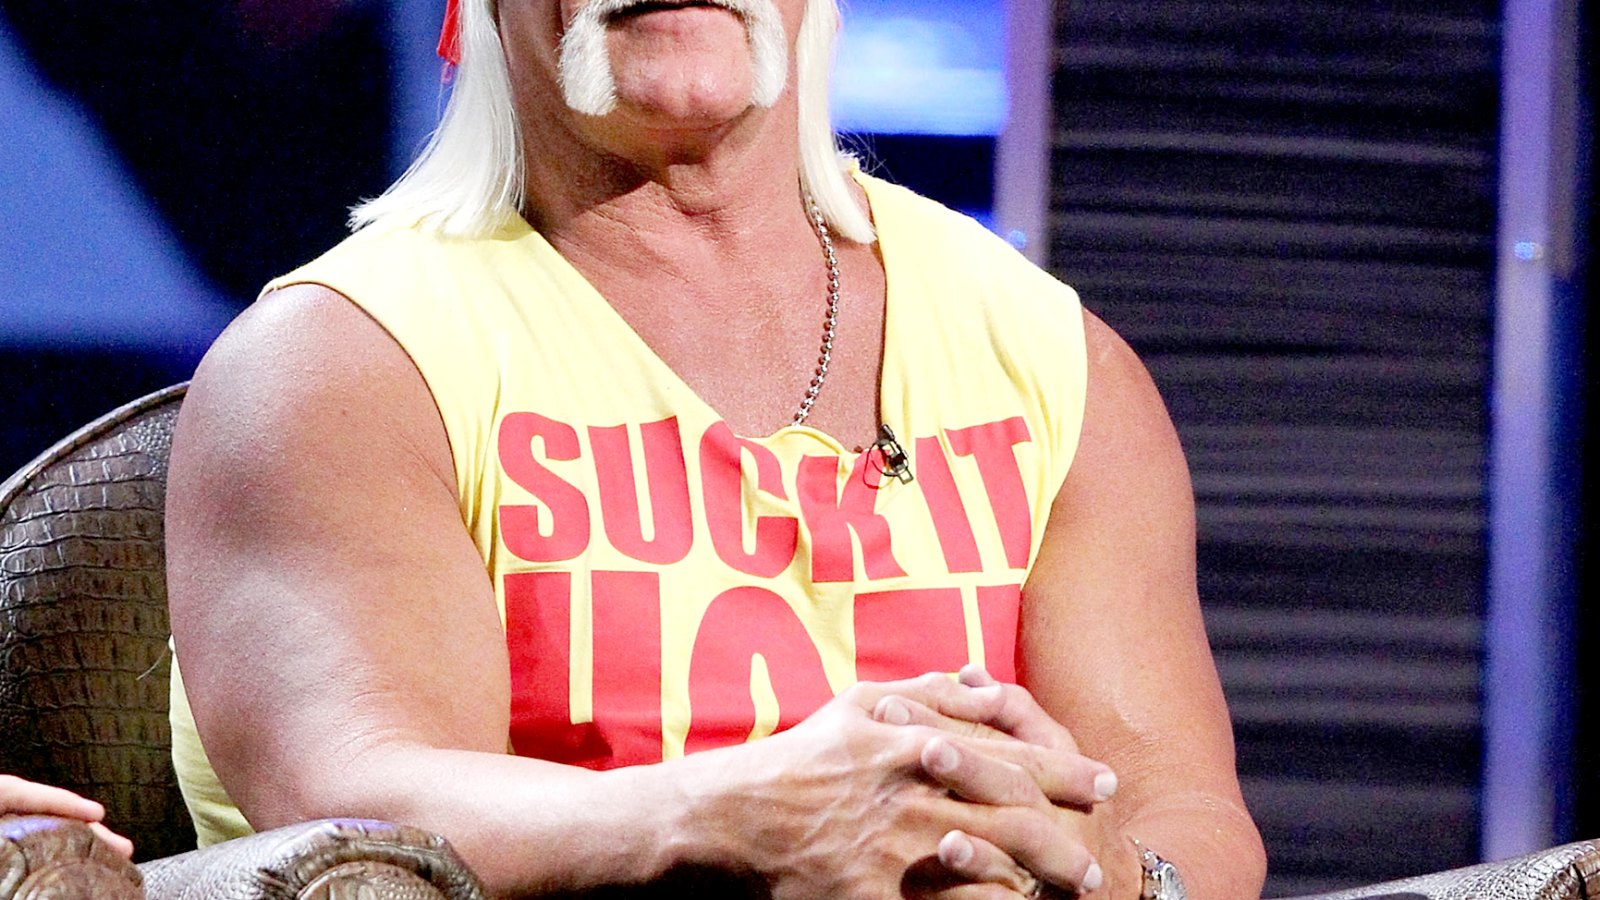 Hulk Hogan Alludes to "Storm" as All Mentions of Him Are Removed